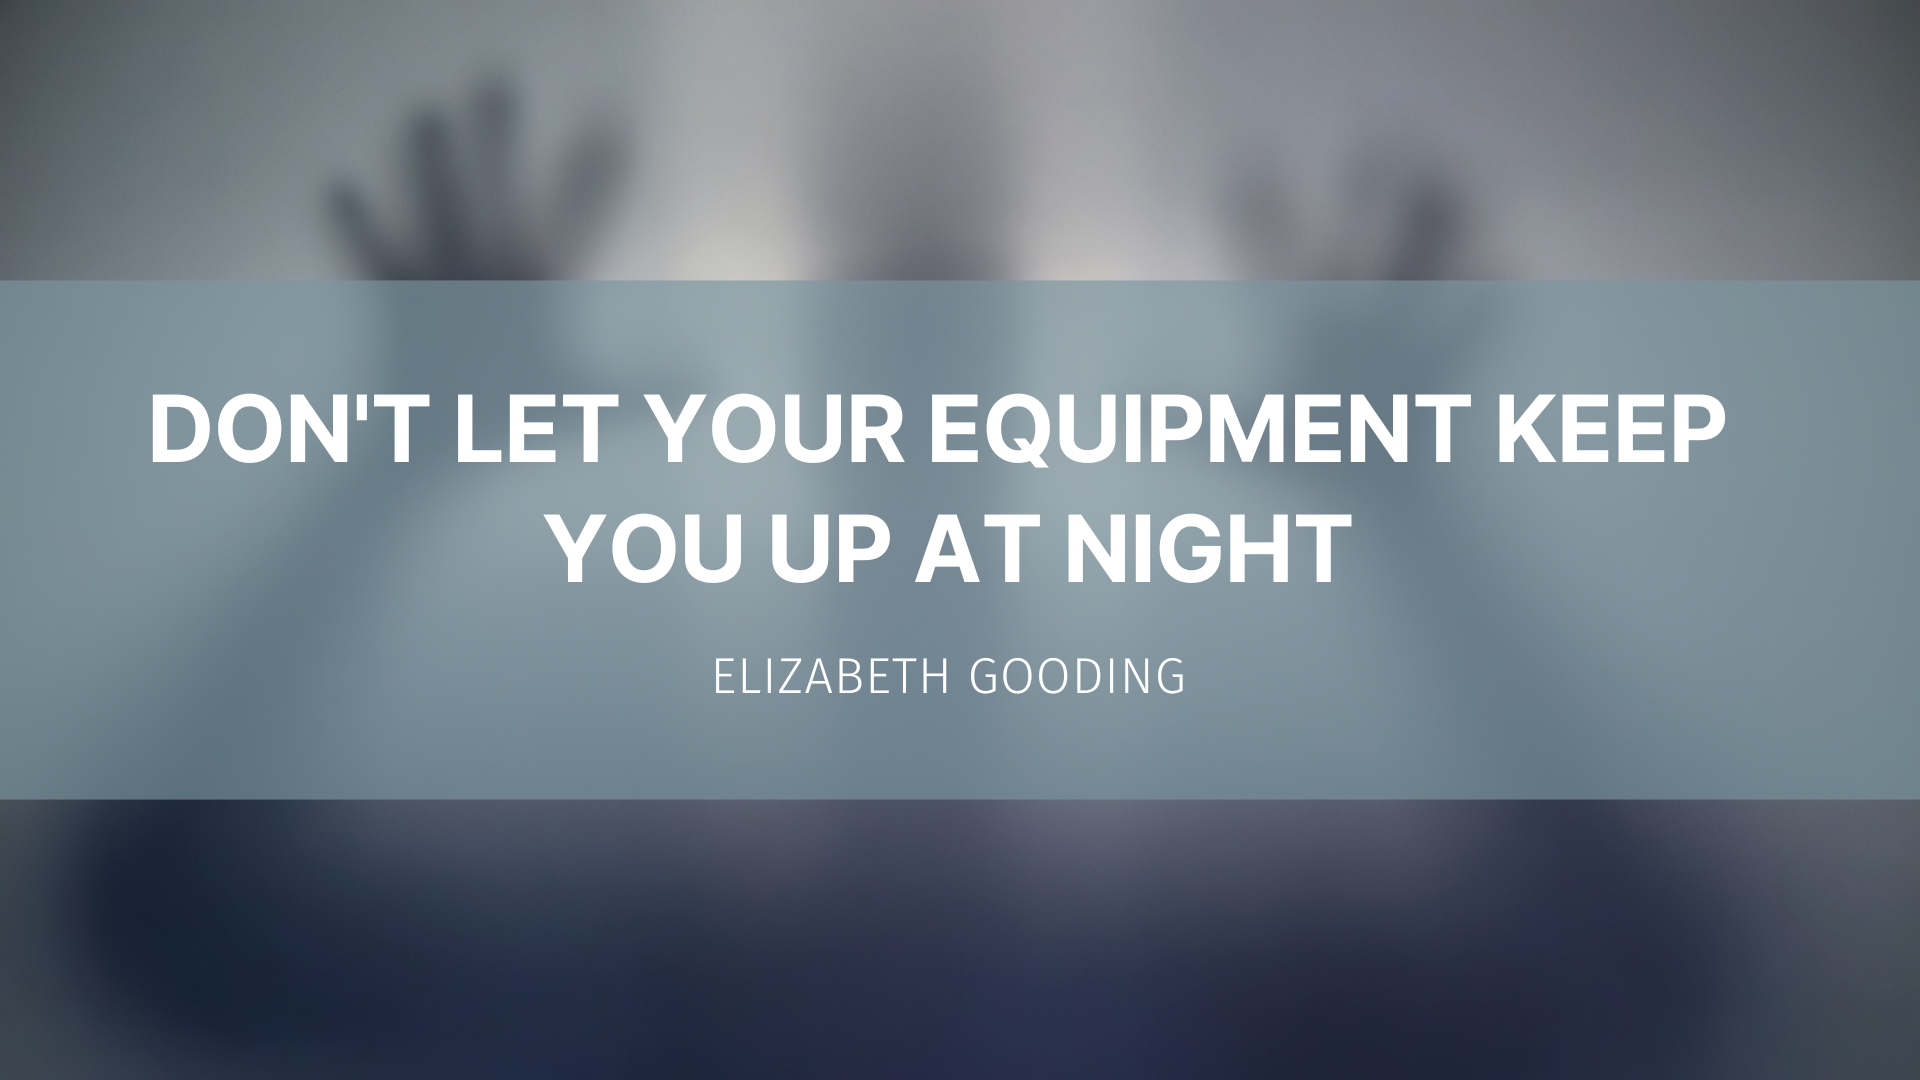 Featured image for “Don’t let your equipment keep you up at night”